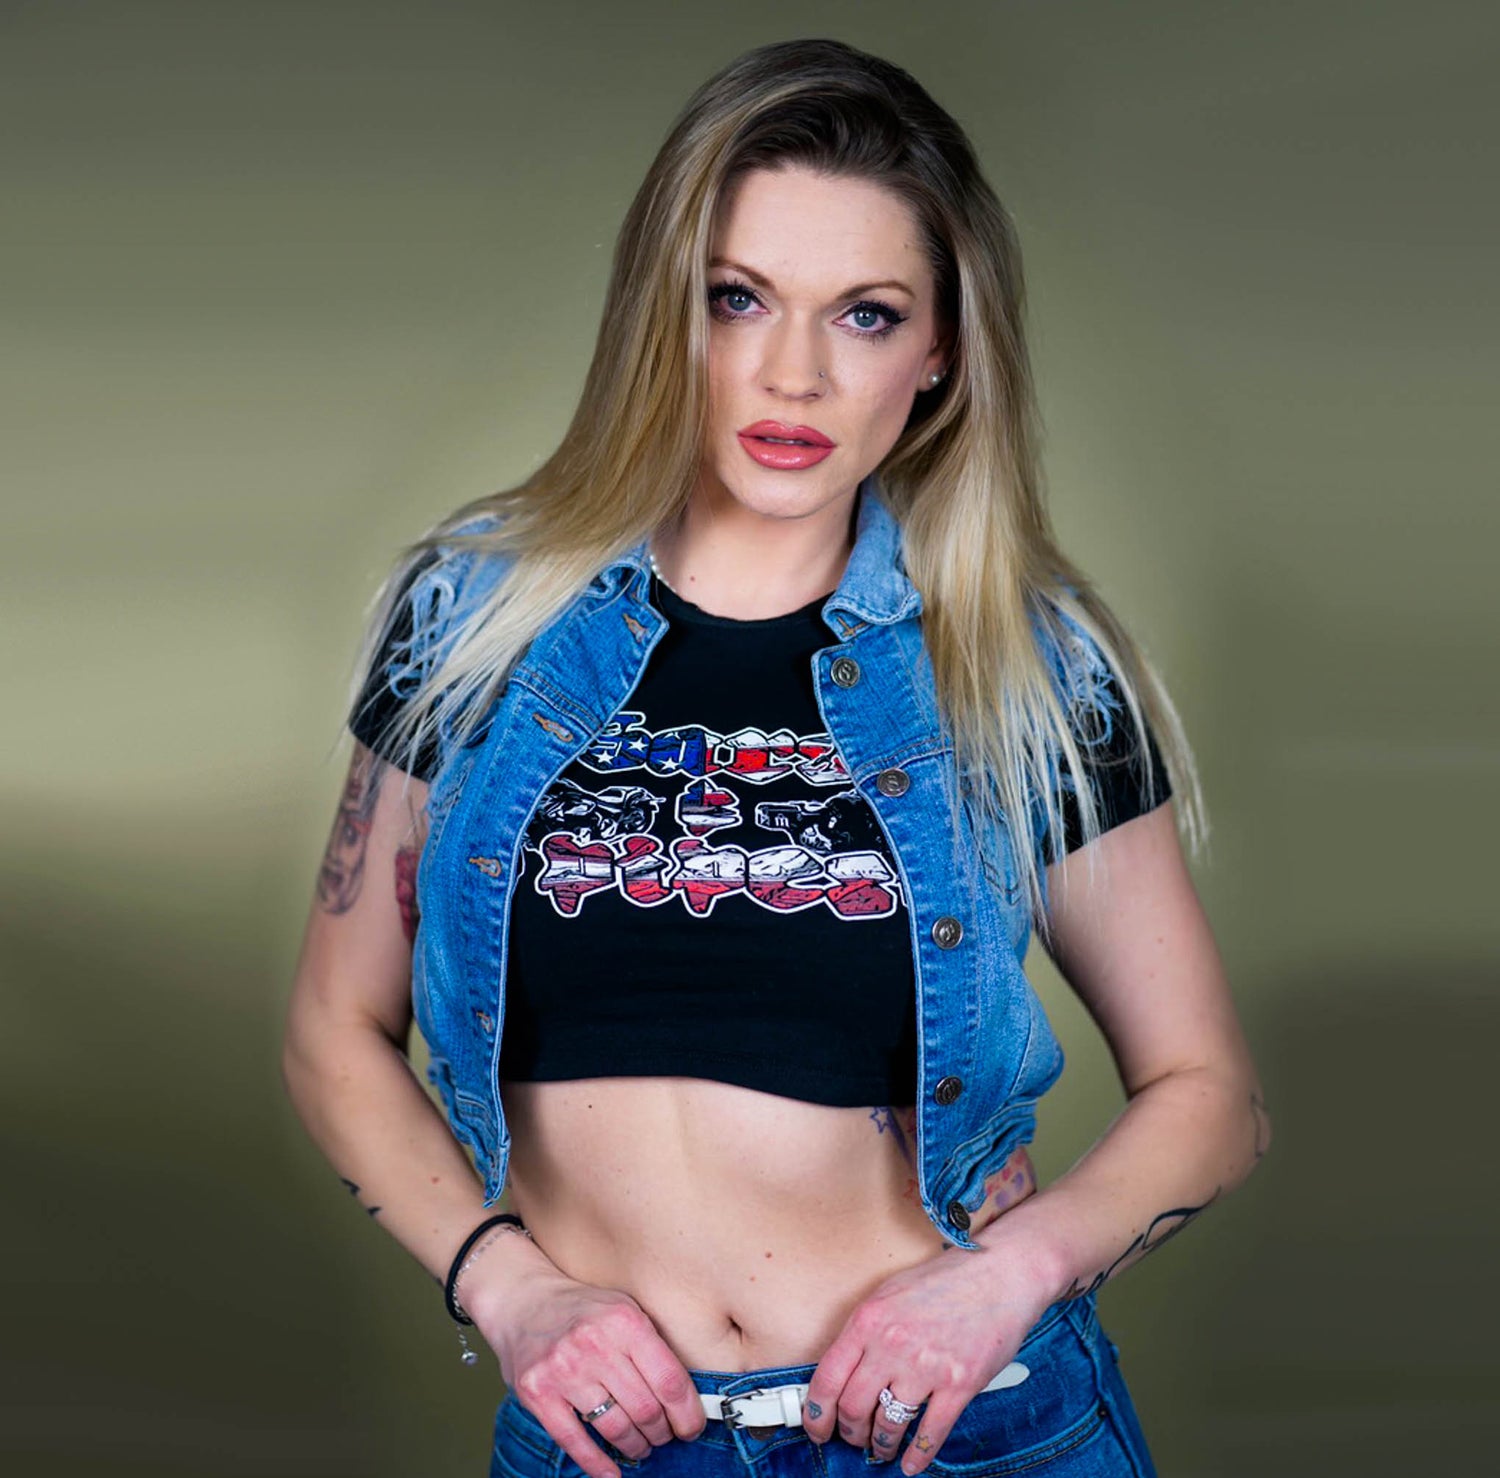 Blonde women wearing a Menace Clothing Bars & Pipes crop top in a jean jacket.